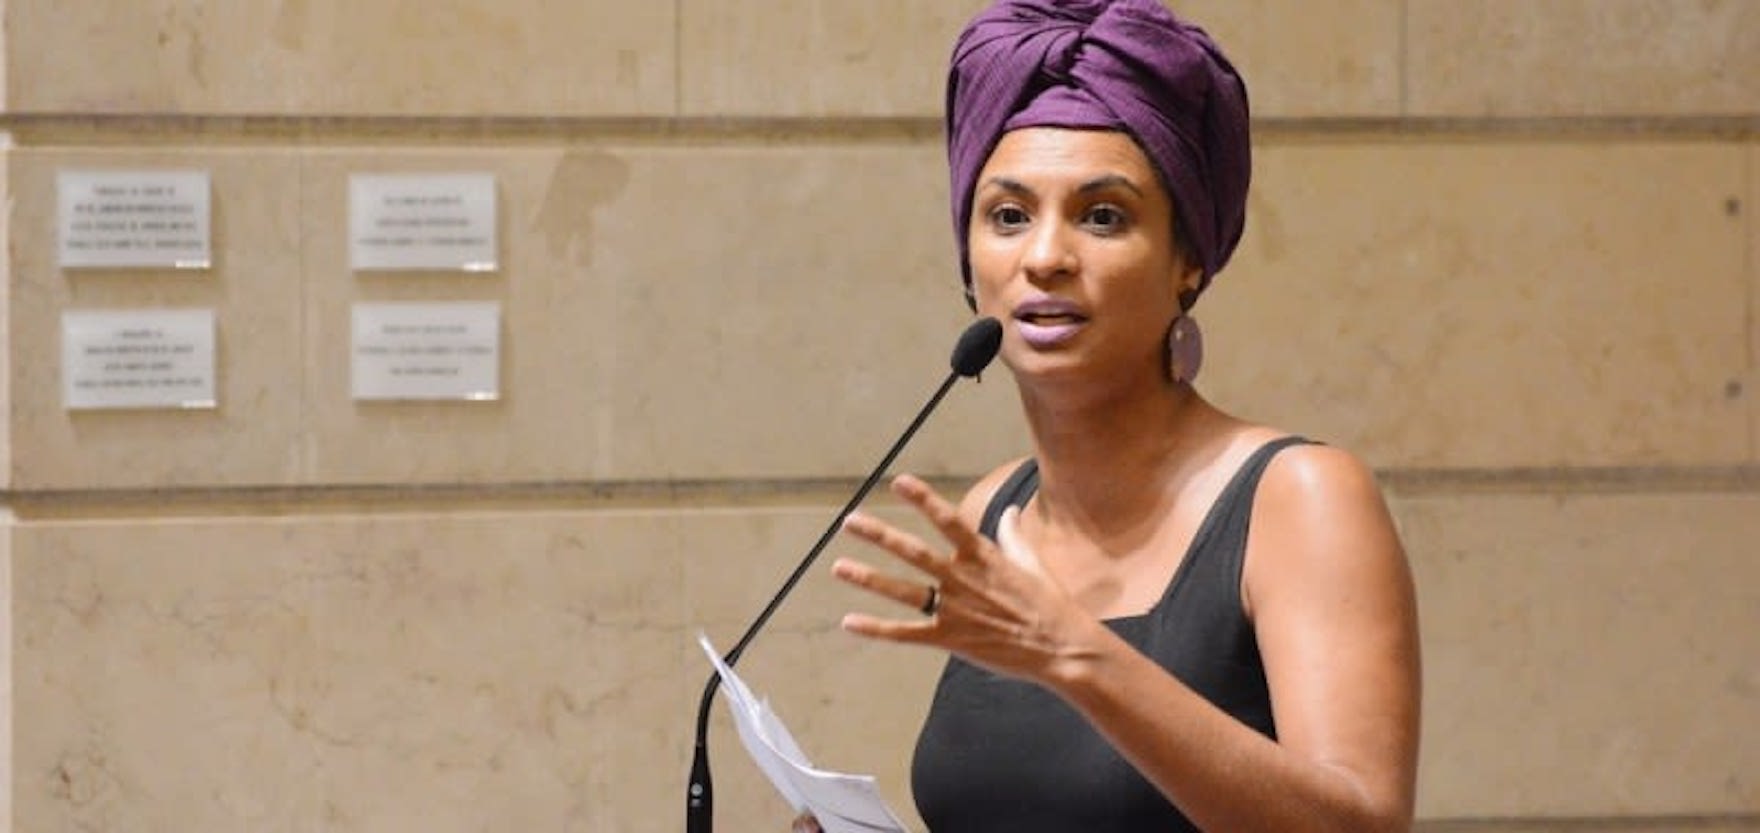 Marielle Franco’s Assassination: One of Tens of Thousands of Black Murders in Brazil